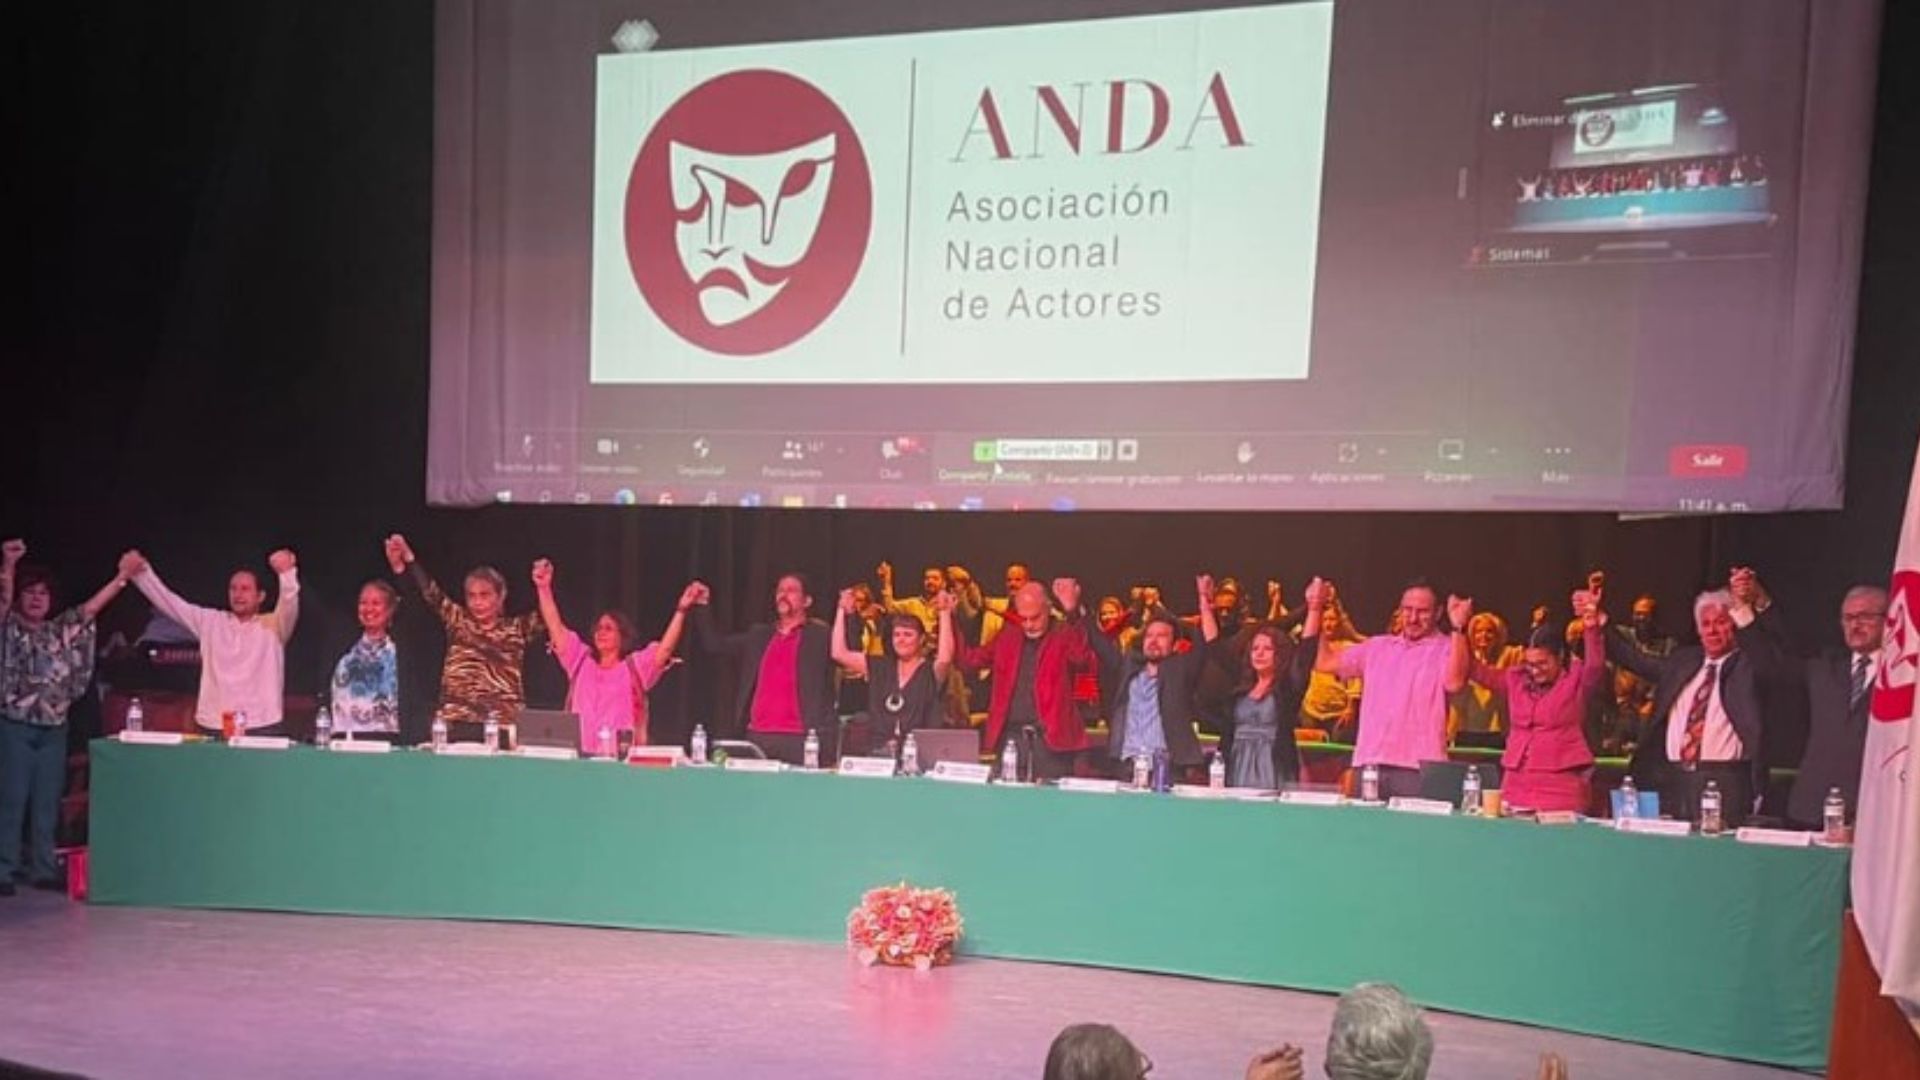 ANDA has been in crisis for years and this began to be reflected with the cut in services for beneficiaries (Facebook / National Association of Actors)